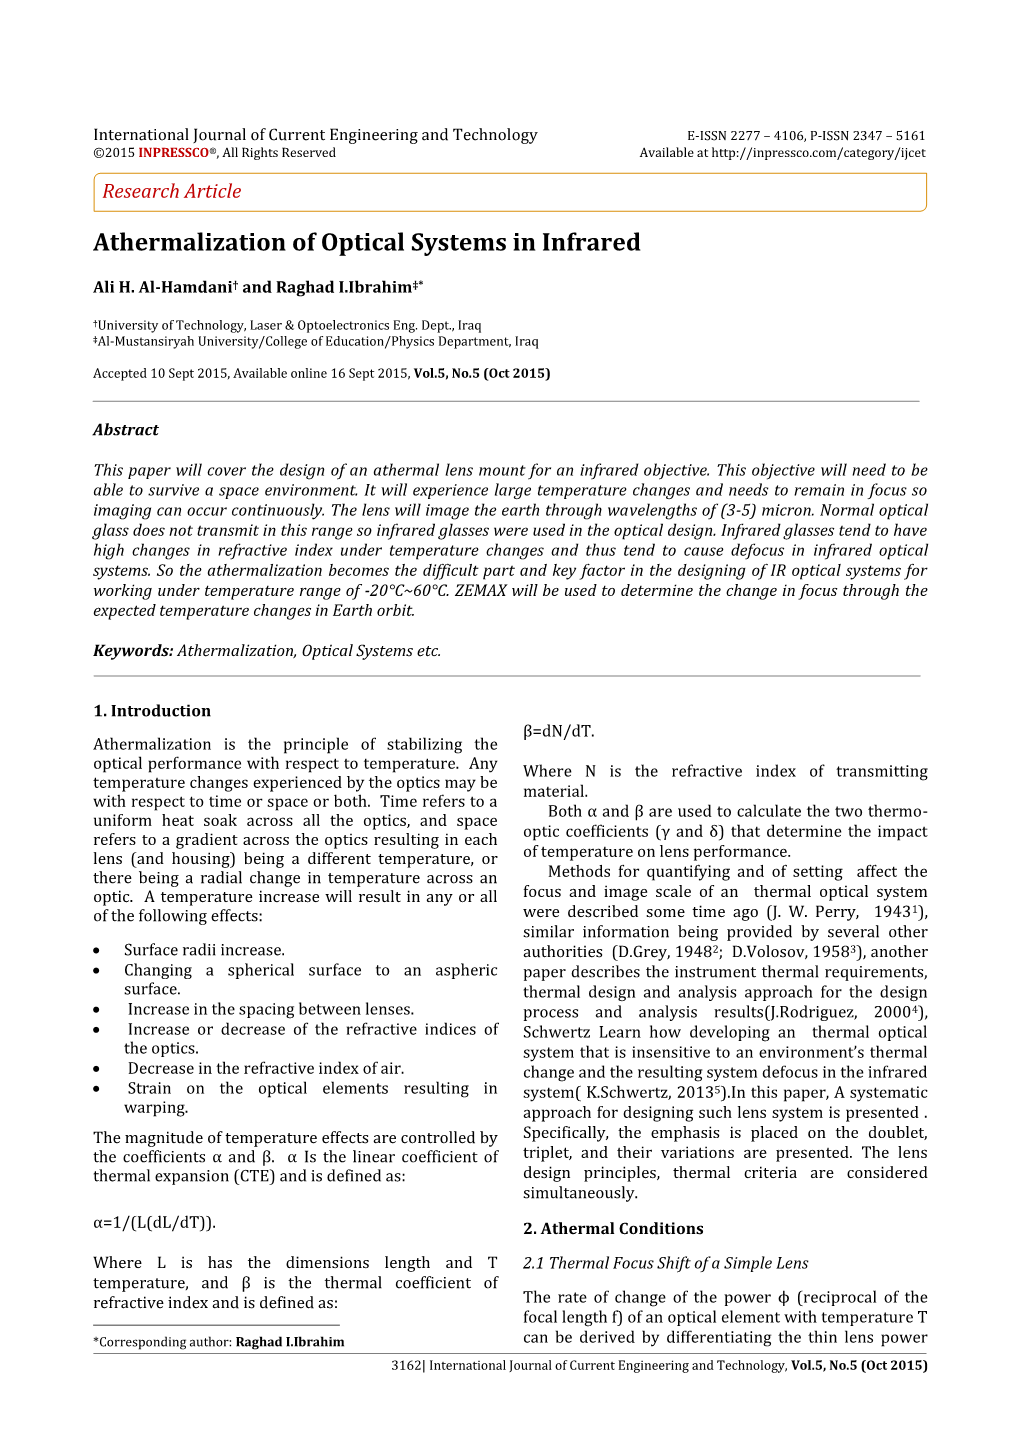 Athermalization of Optical Systems in Infrared